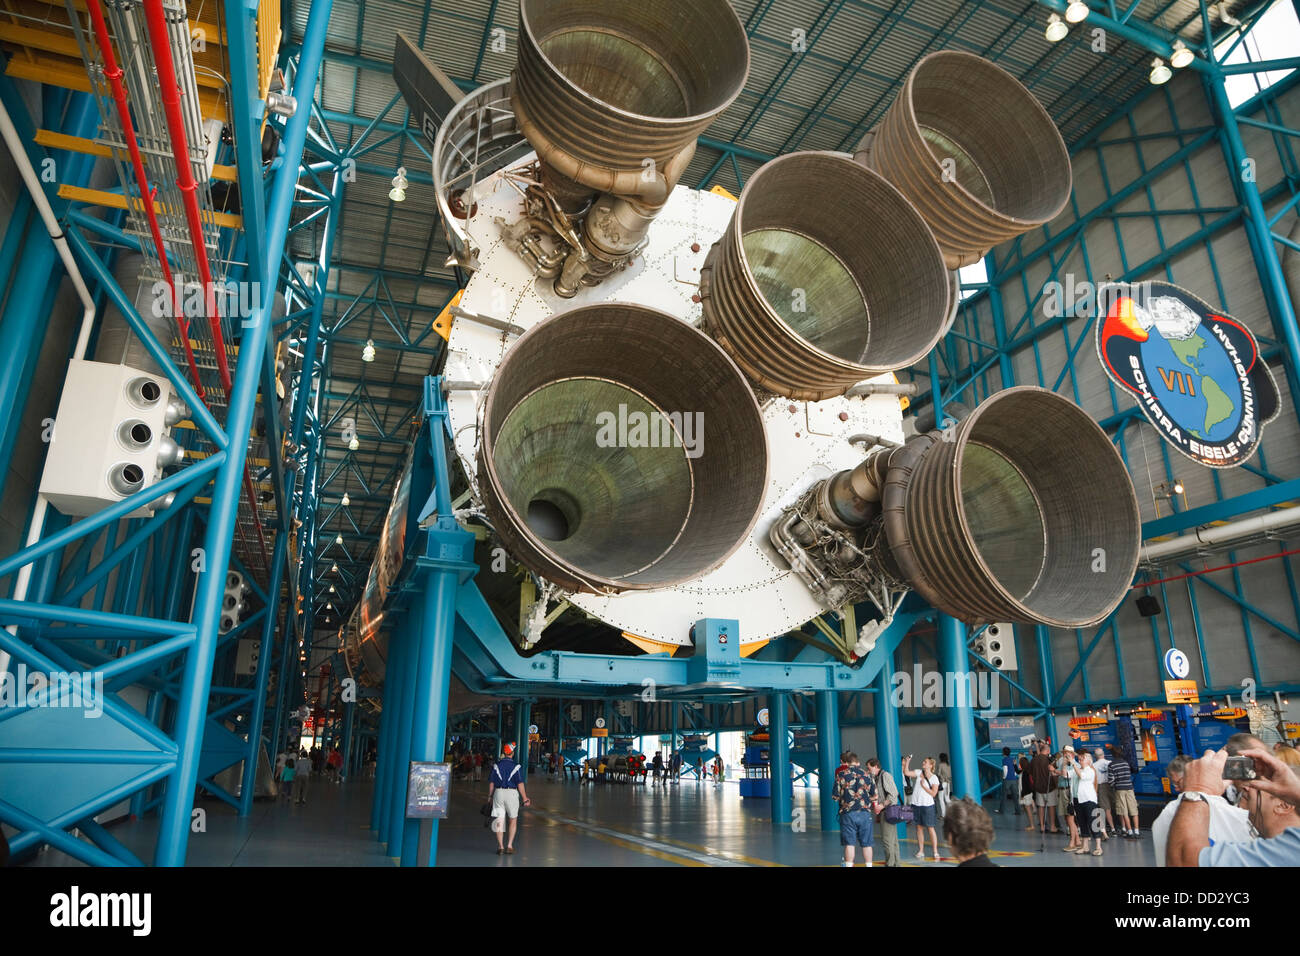 Saturn V Rocket at John F Kennedy Space Centre, Cape Canaveral, Florida Stock Photo